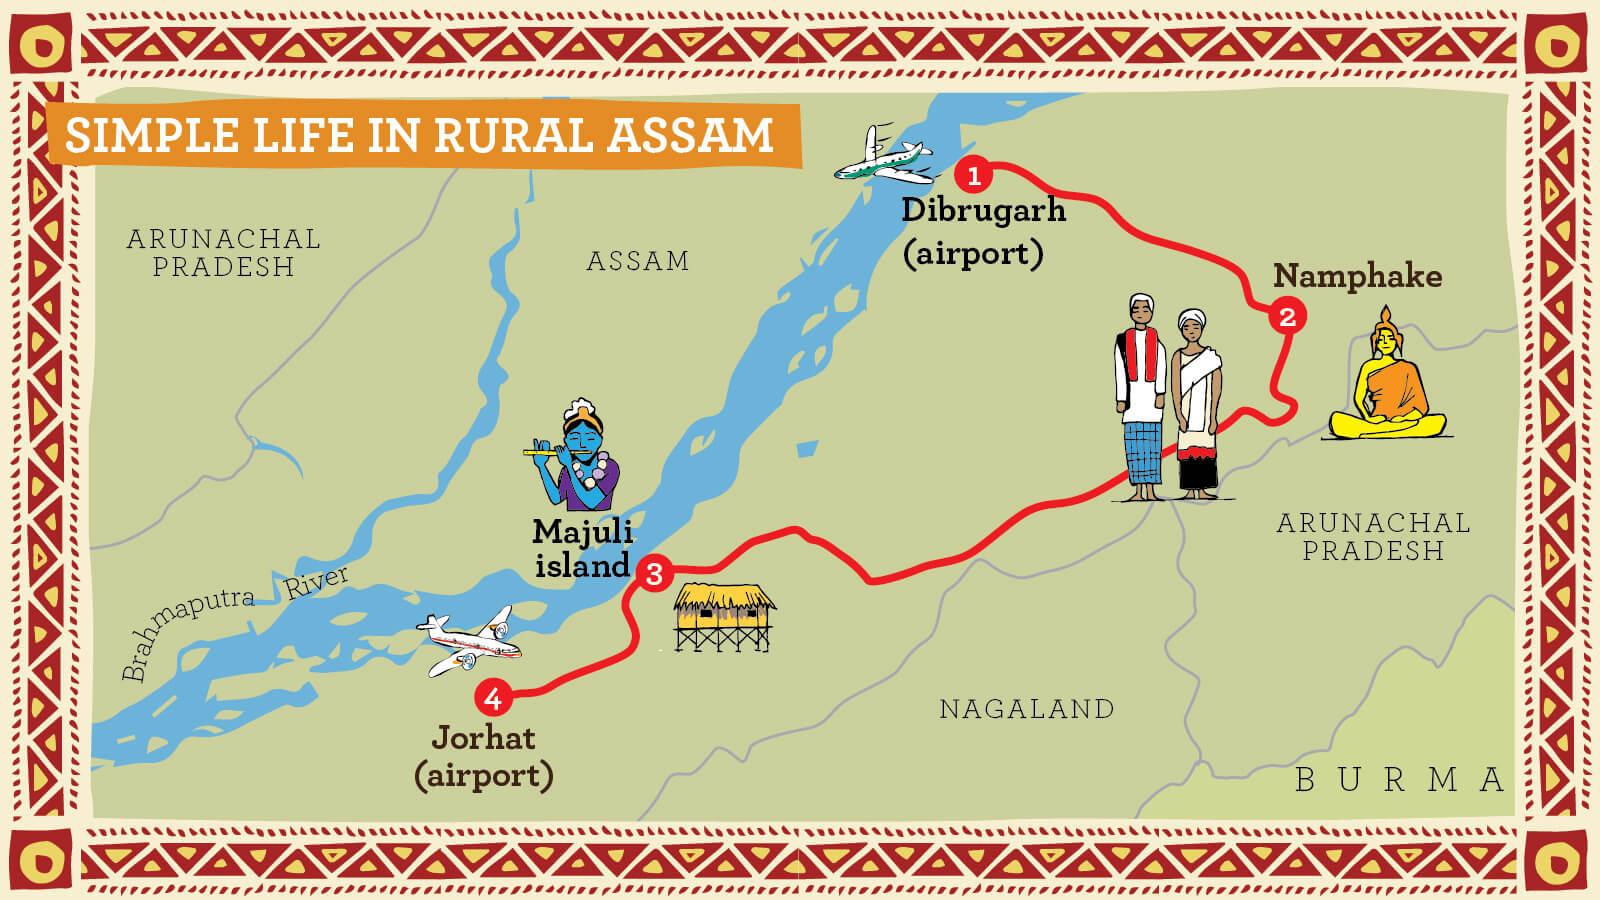 Illustrated Route Map for Assam Rural Travel and Tour